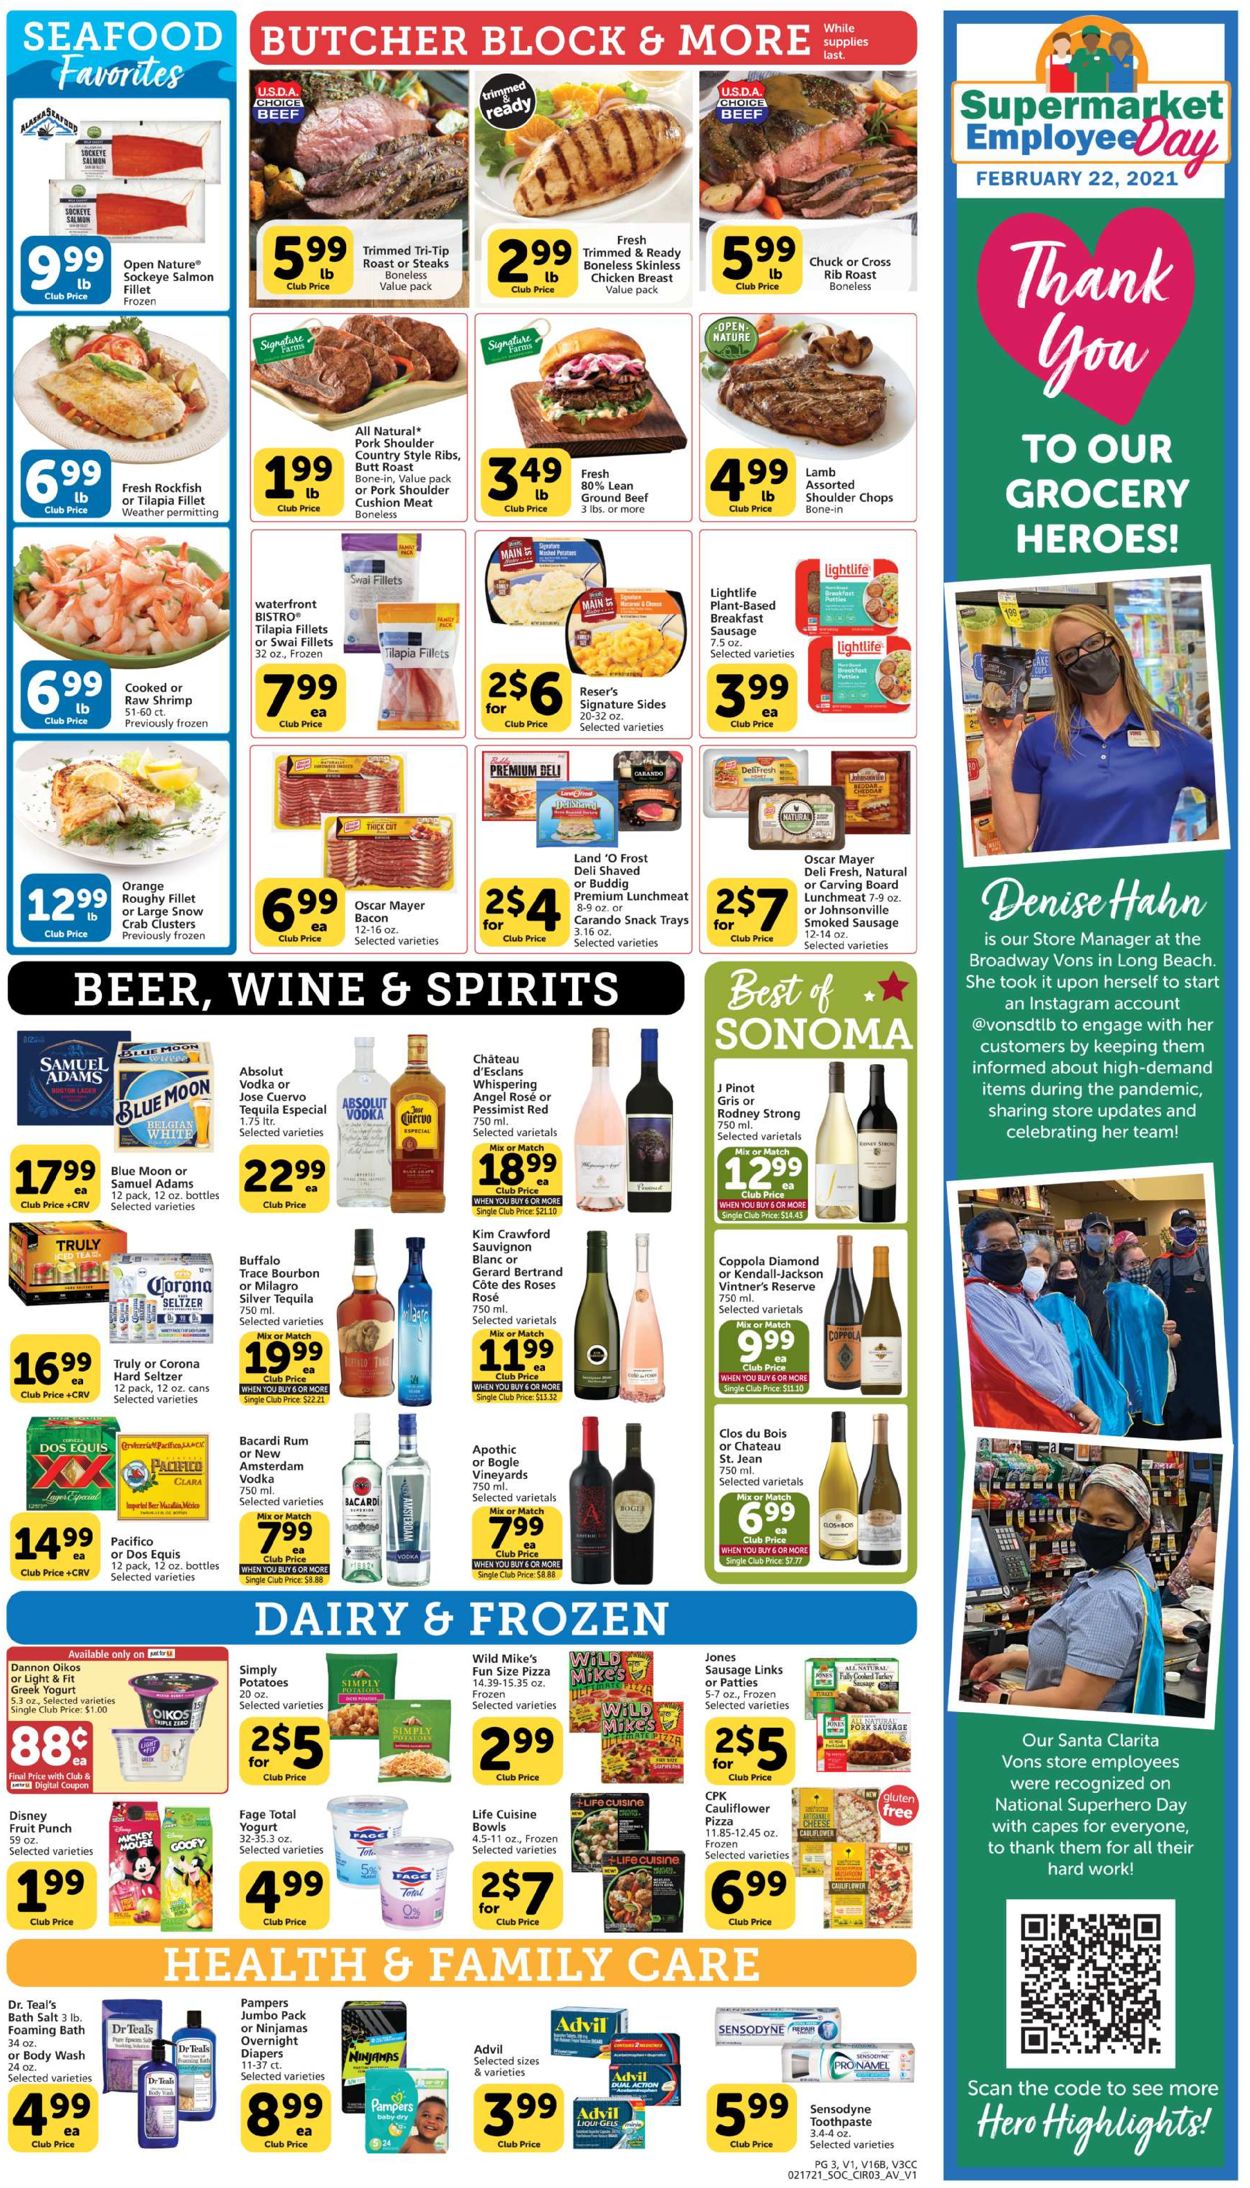 Vons Ad from 02/17/2021